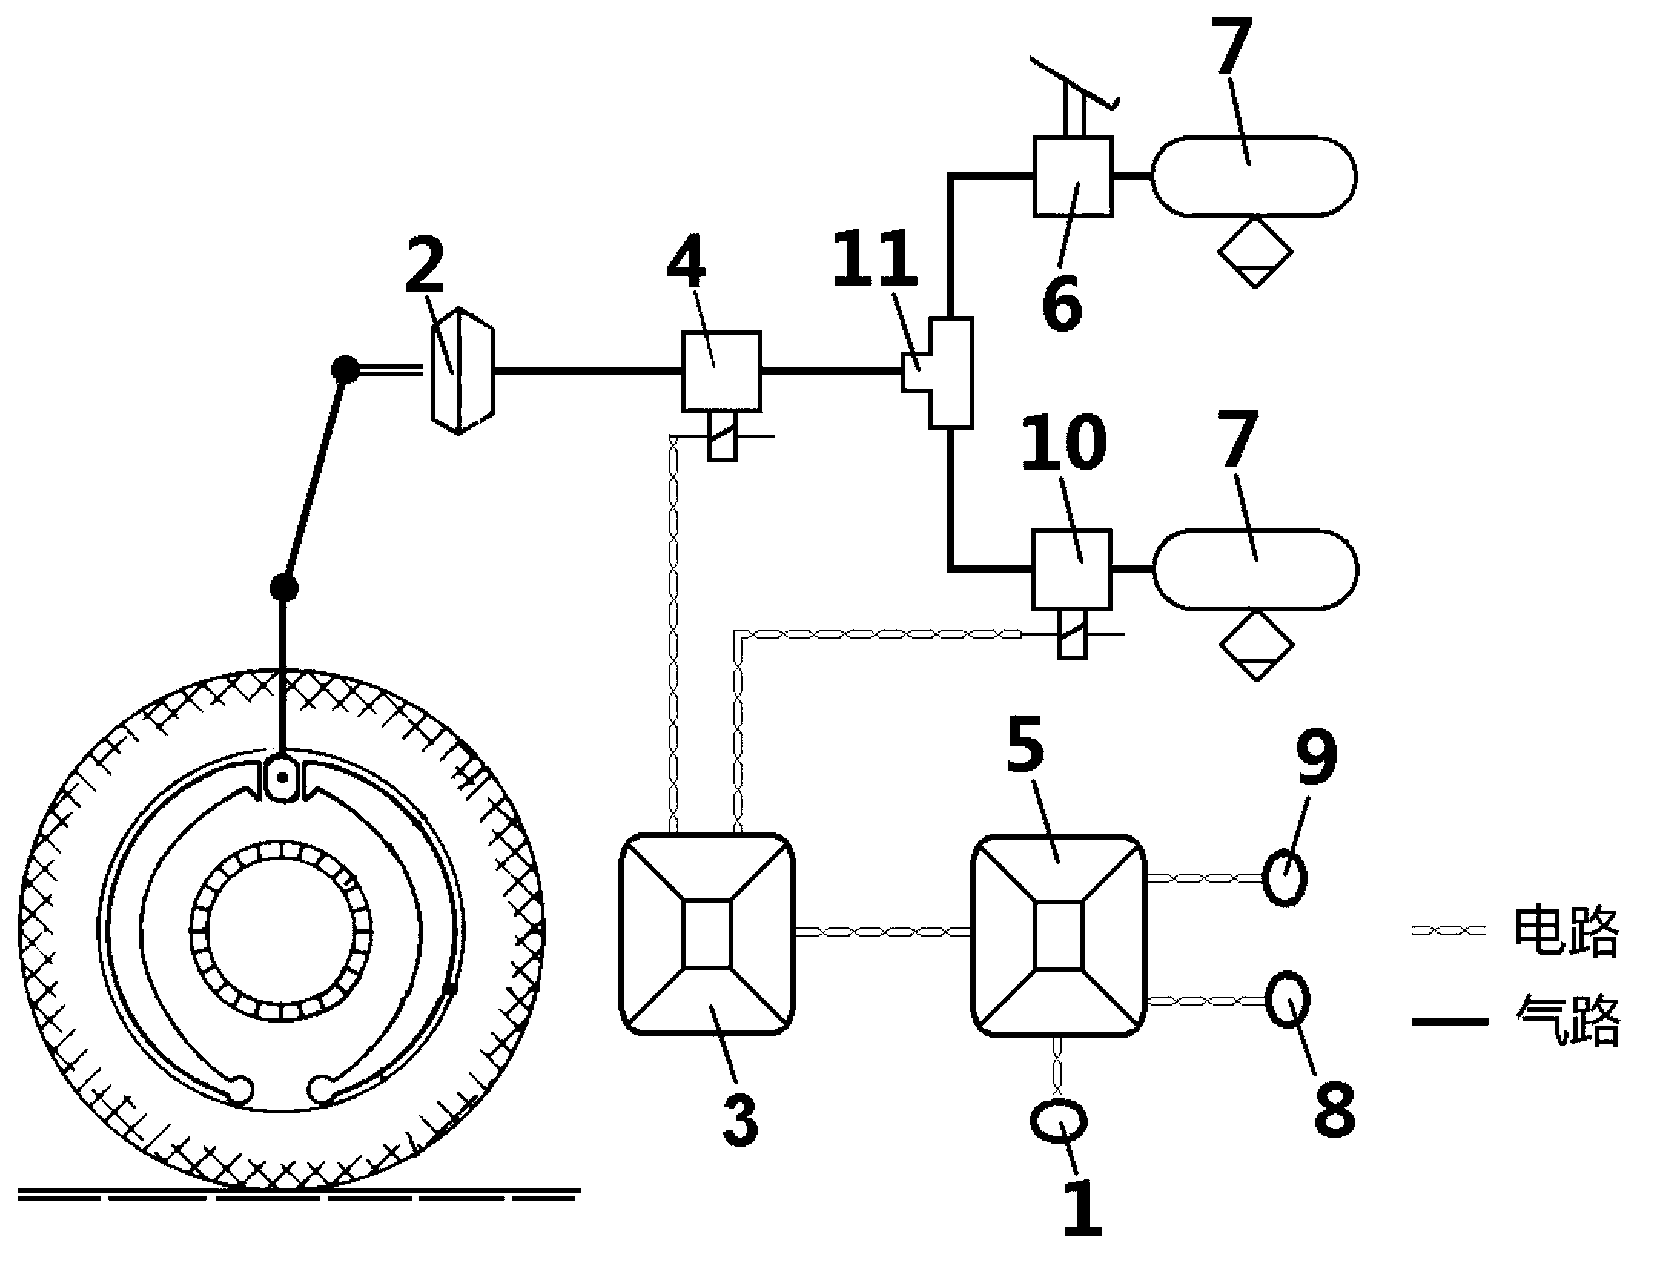 Aiding hill starting method based on anti-lock braking system (ABS) and system using same